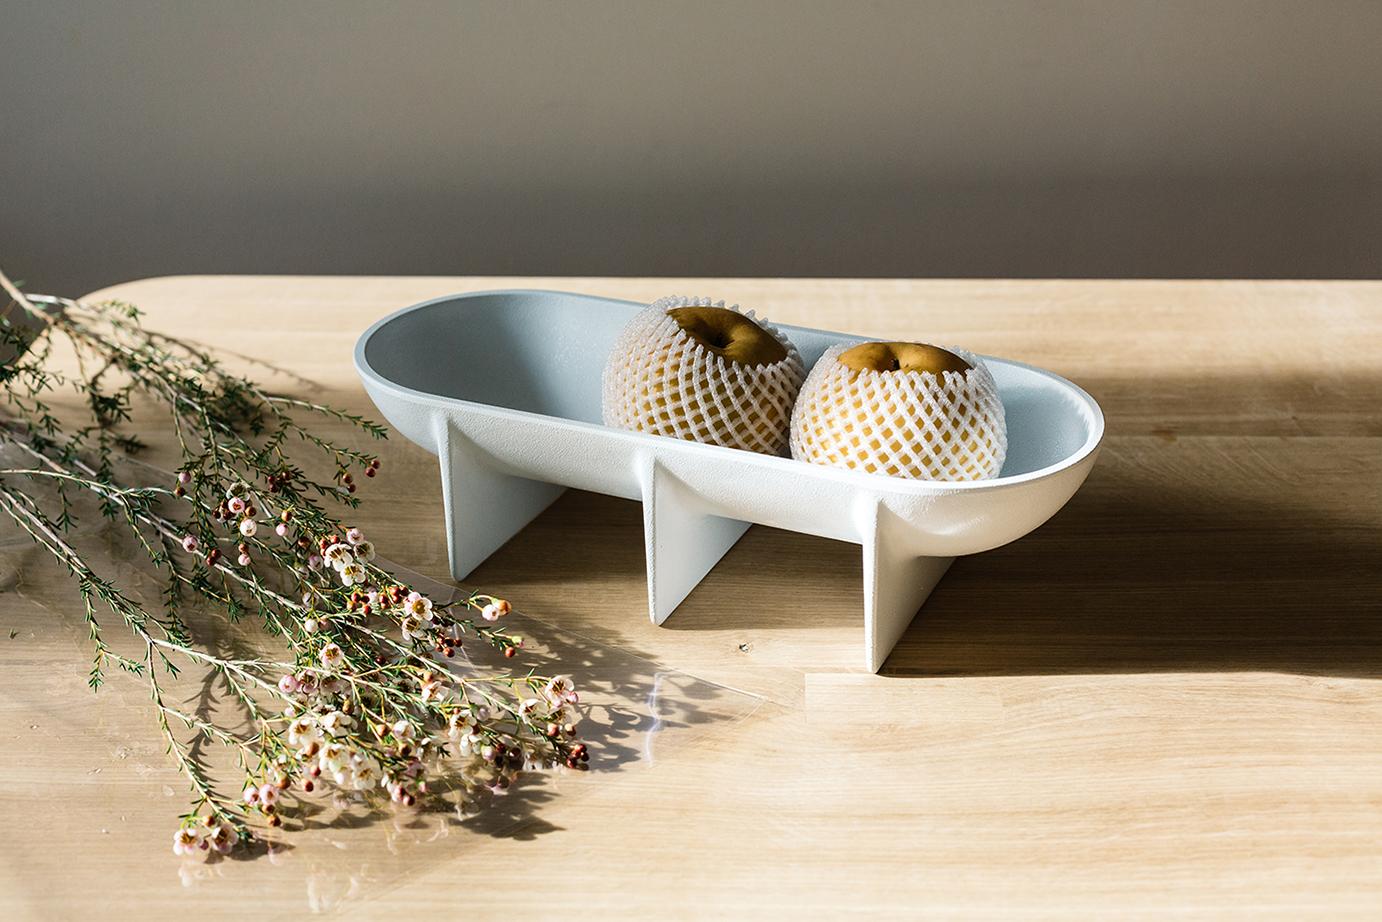 Place this unique design on a favorite table for the perfect centerpiece or enjoy in the kitchen as a special fruit bowl. 

The die cast aluminum standing bowl is elevated off the table surface by its architecturally inspired planar legs. Each